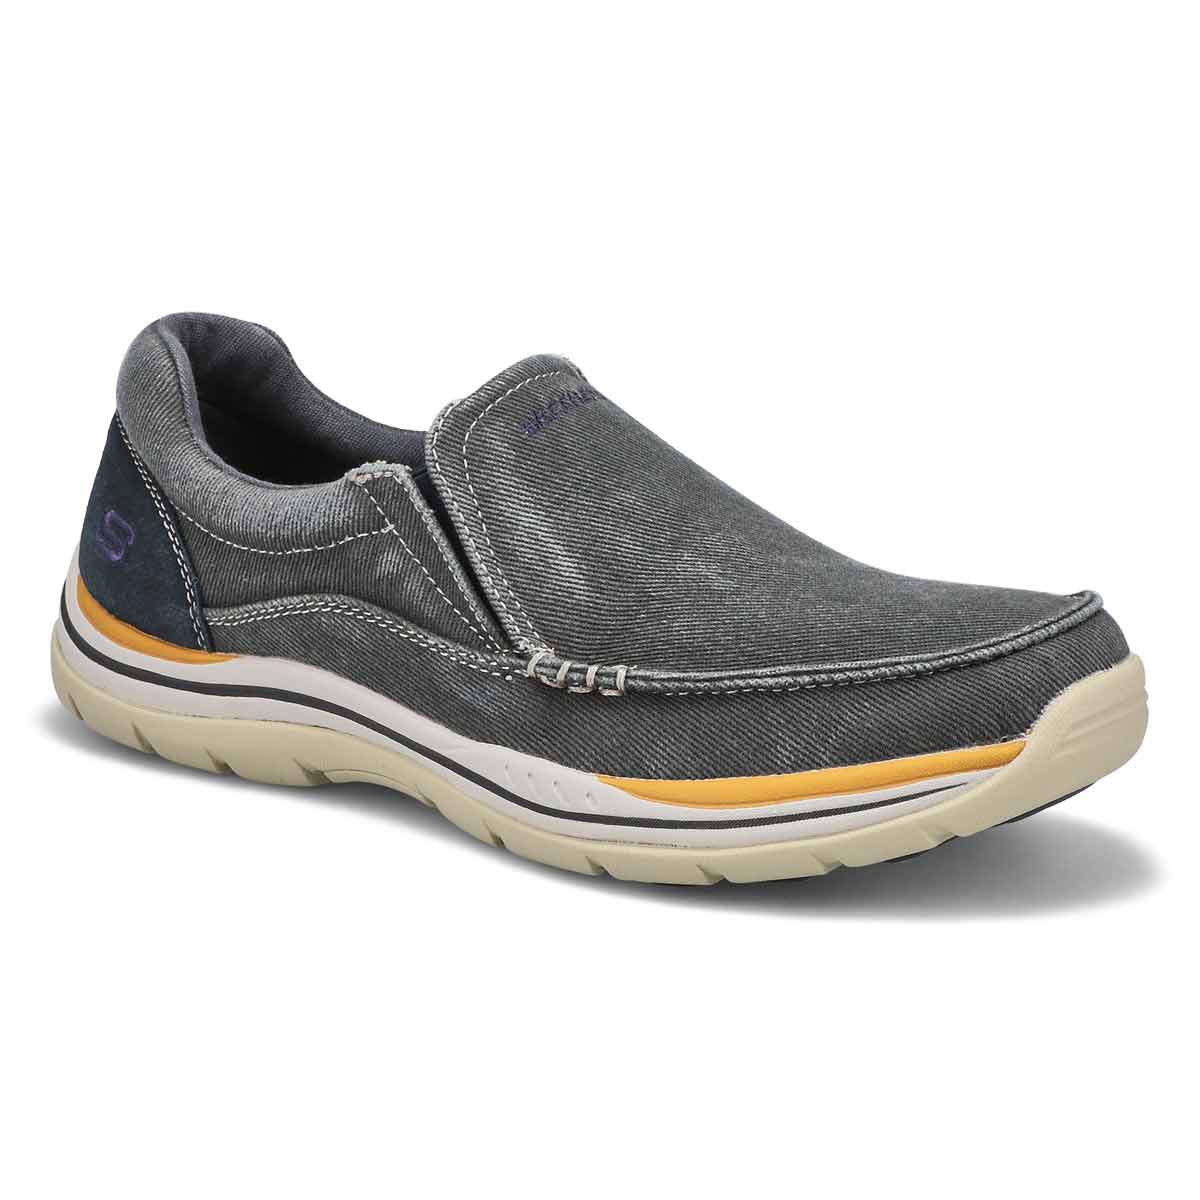 who sells skechers in canada